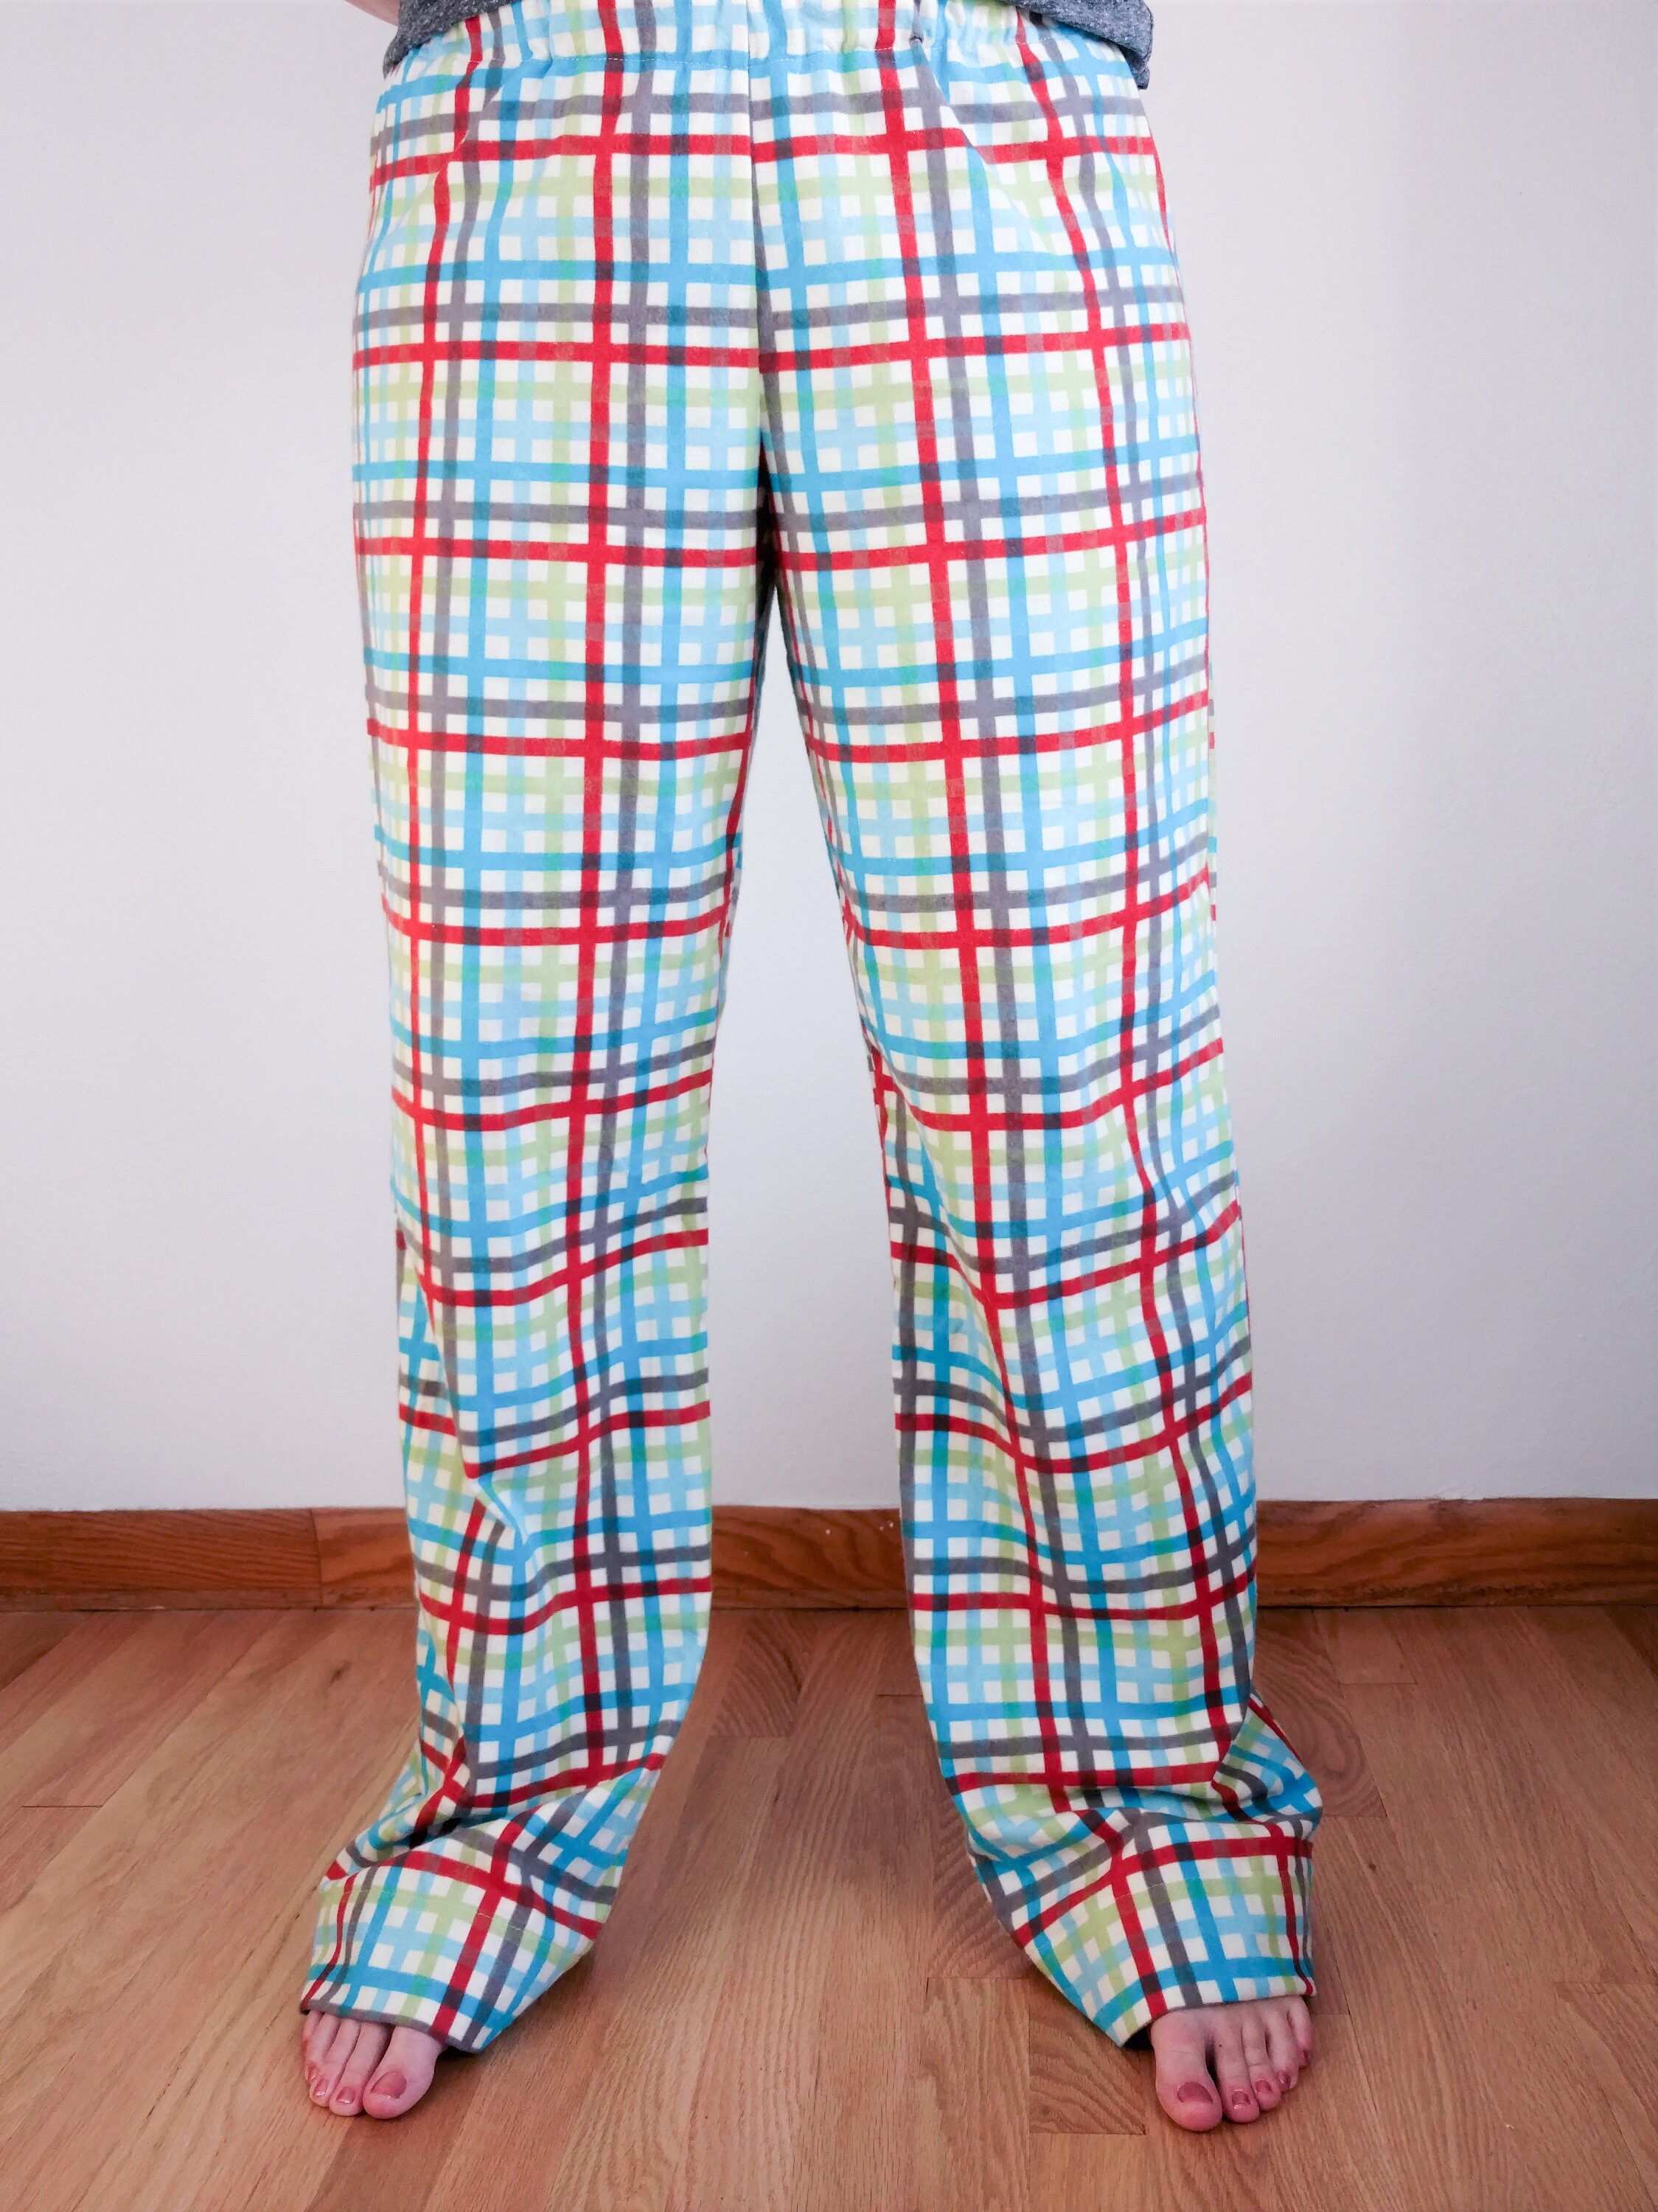 Women's Extra Tall Flannel Pajama Pants Extra Long Pj Pants Teal